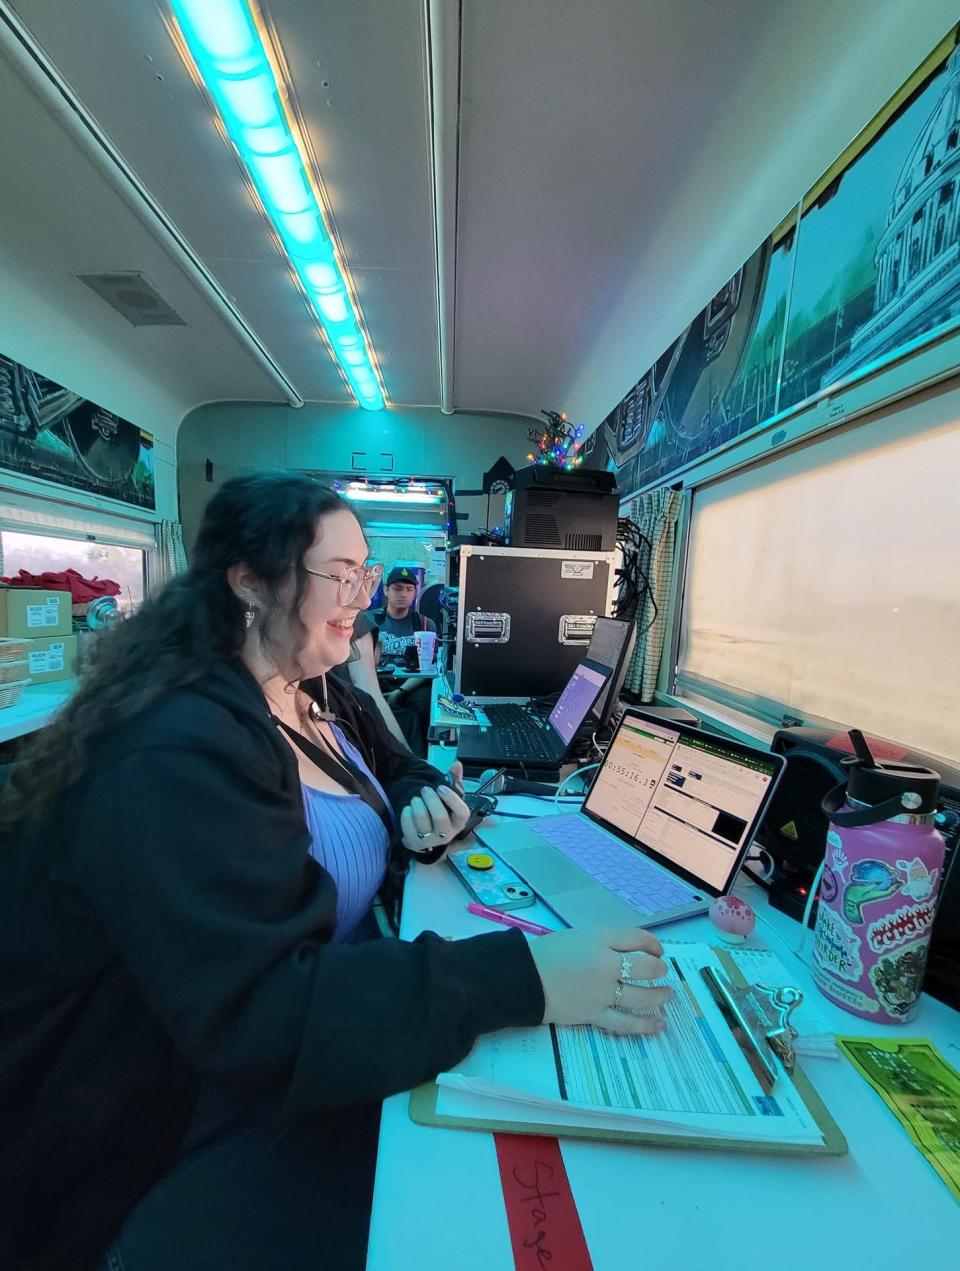 Katy Sullivan, stage manager for the Oklahoma City "Polar Express Train Ride," tracks an afternoon performance as she rides in the production car on a recent Saturday. The popular yuletide attraction runs through Dec. 27 at the Oklahoma Railway Museum in Oklahoma City.